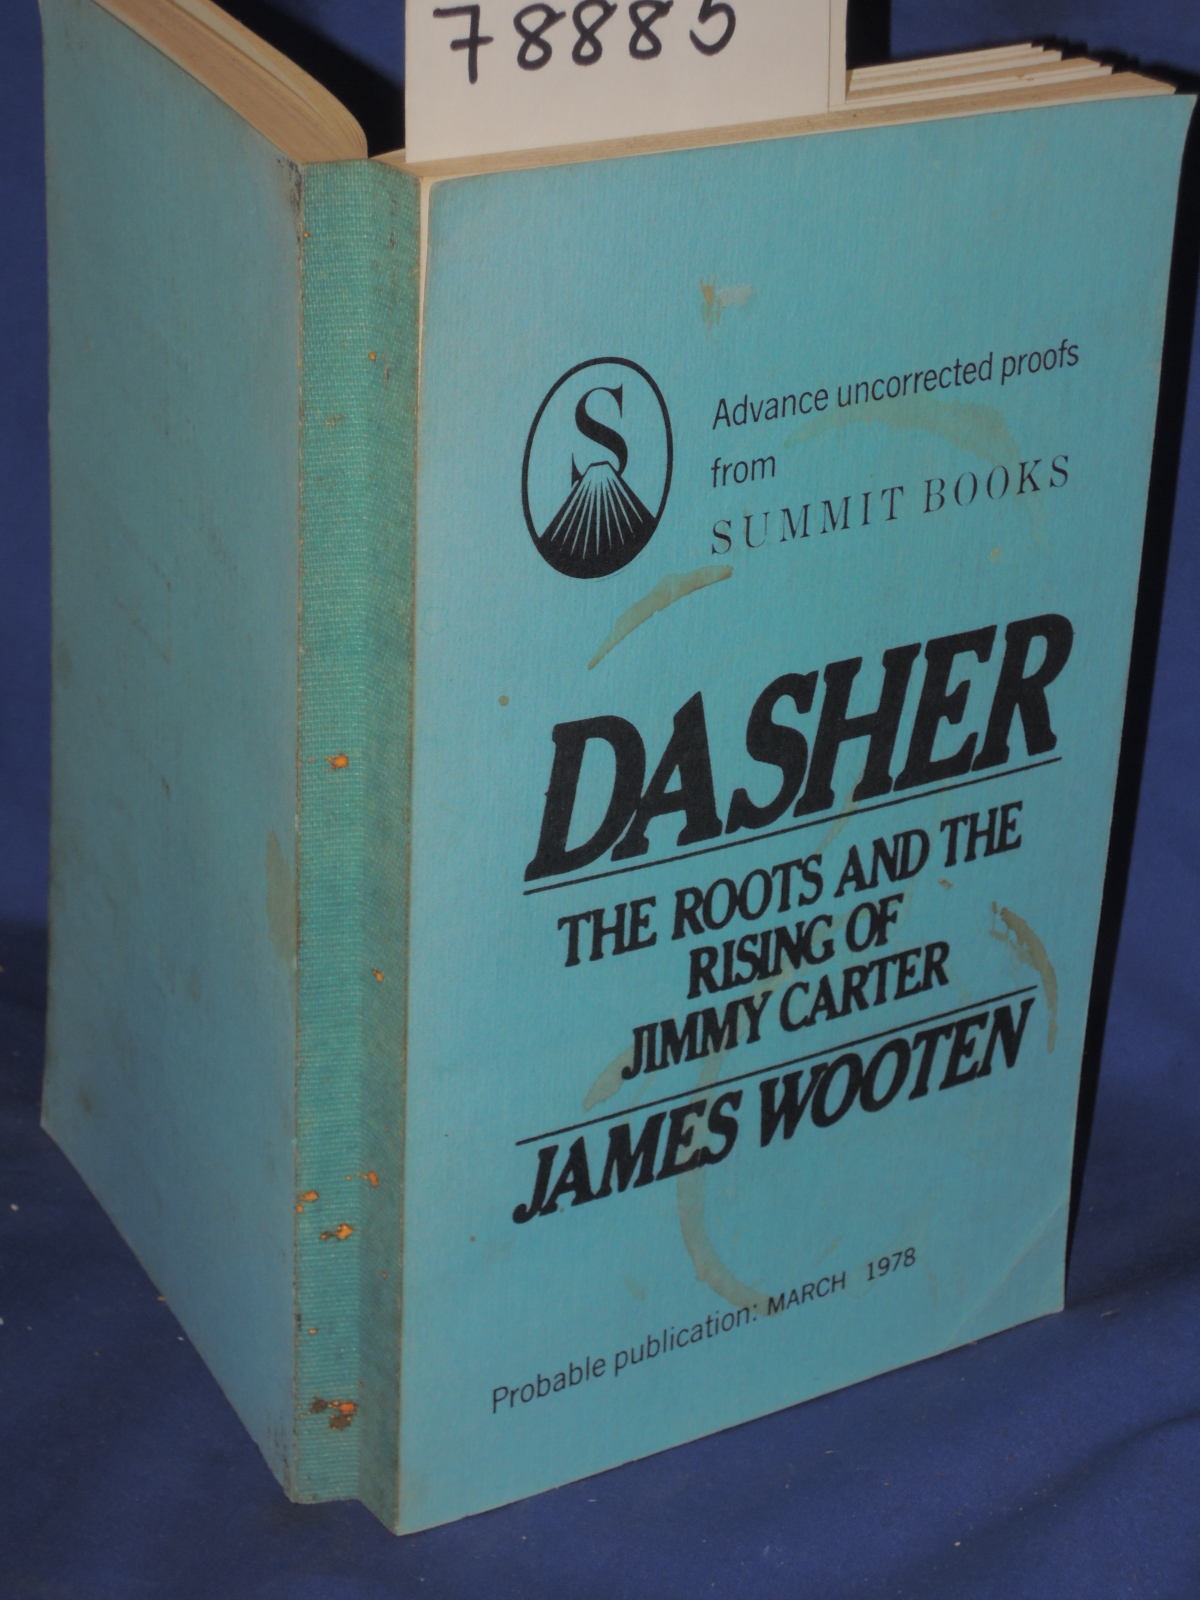 Wooten, James: DASHER THE ROOTS AND THE RISING OF JIMMY CARTER:  Advance Unco...